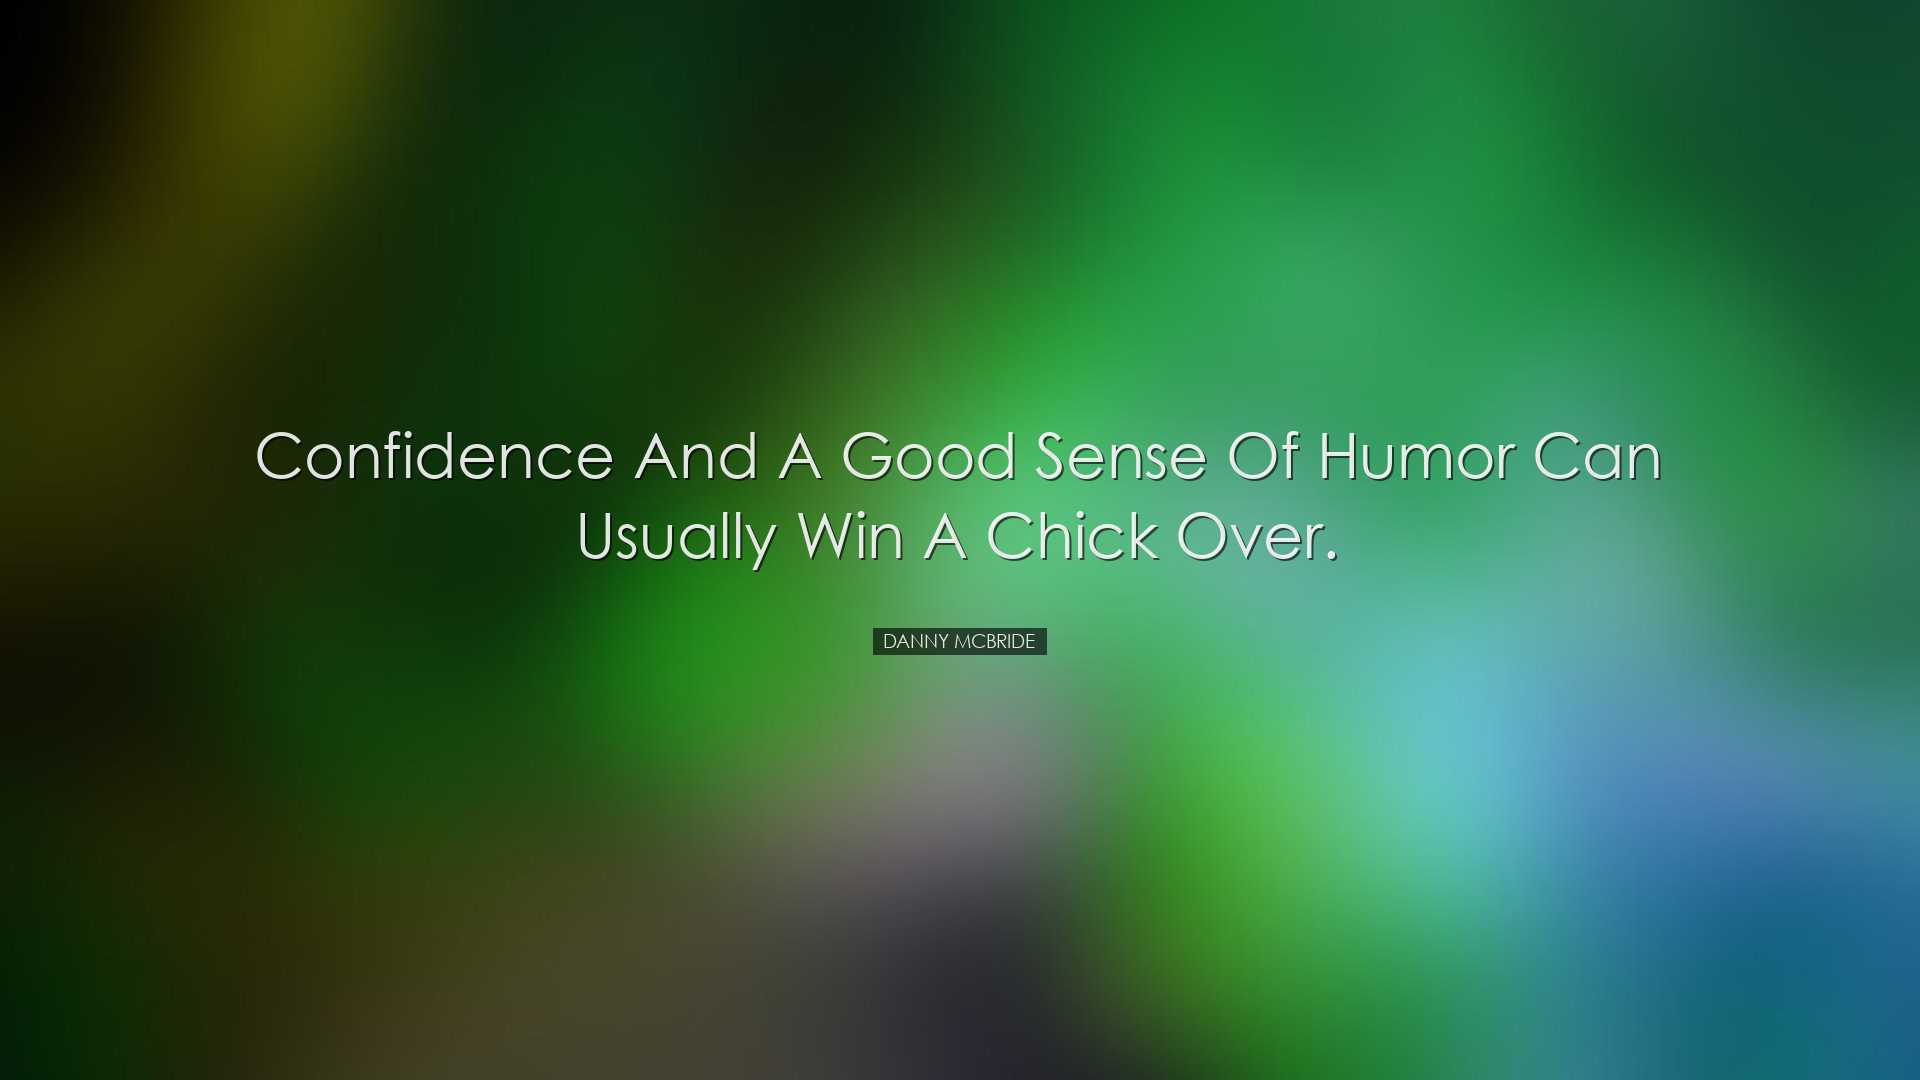 Confidence and a good sense of humor can usually win a chick over.